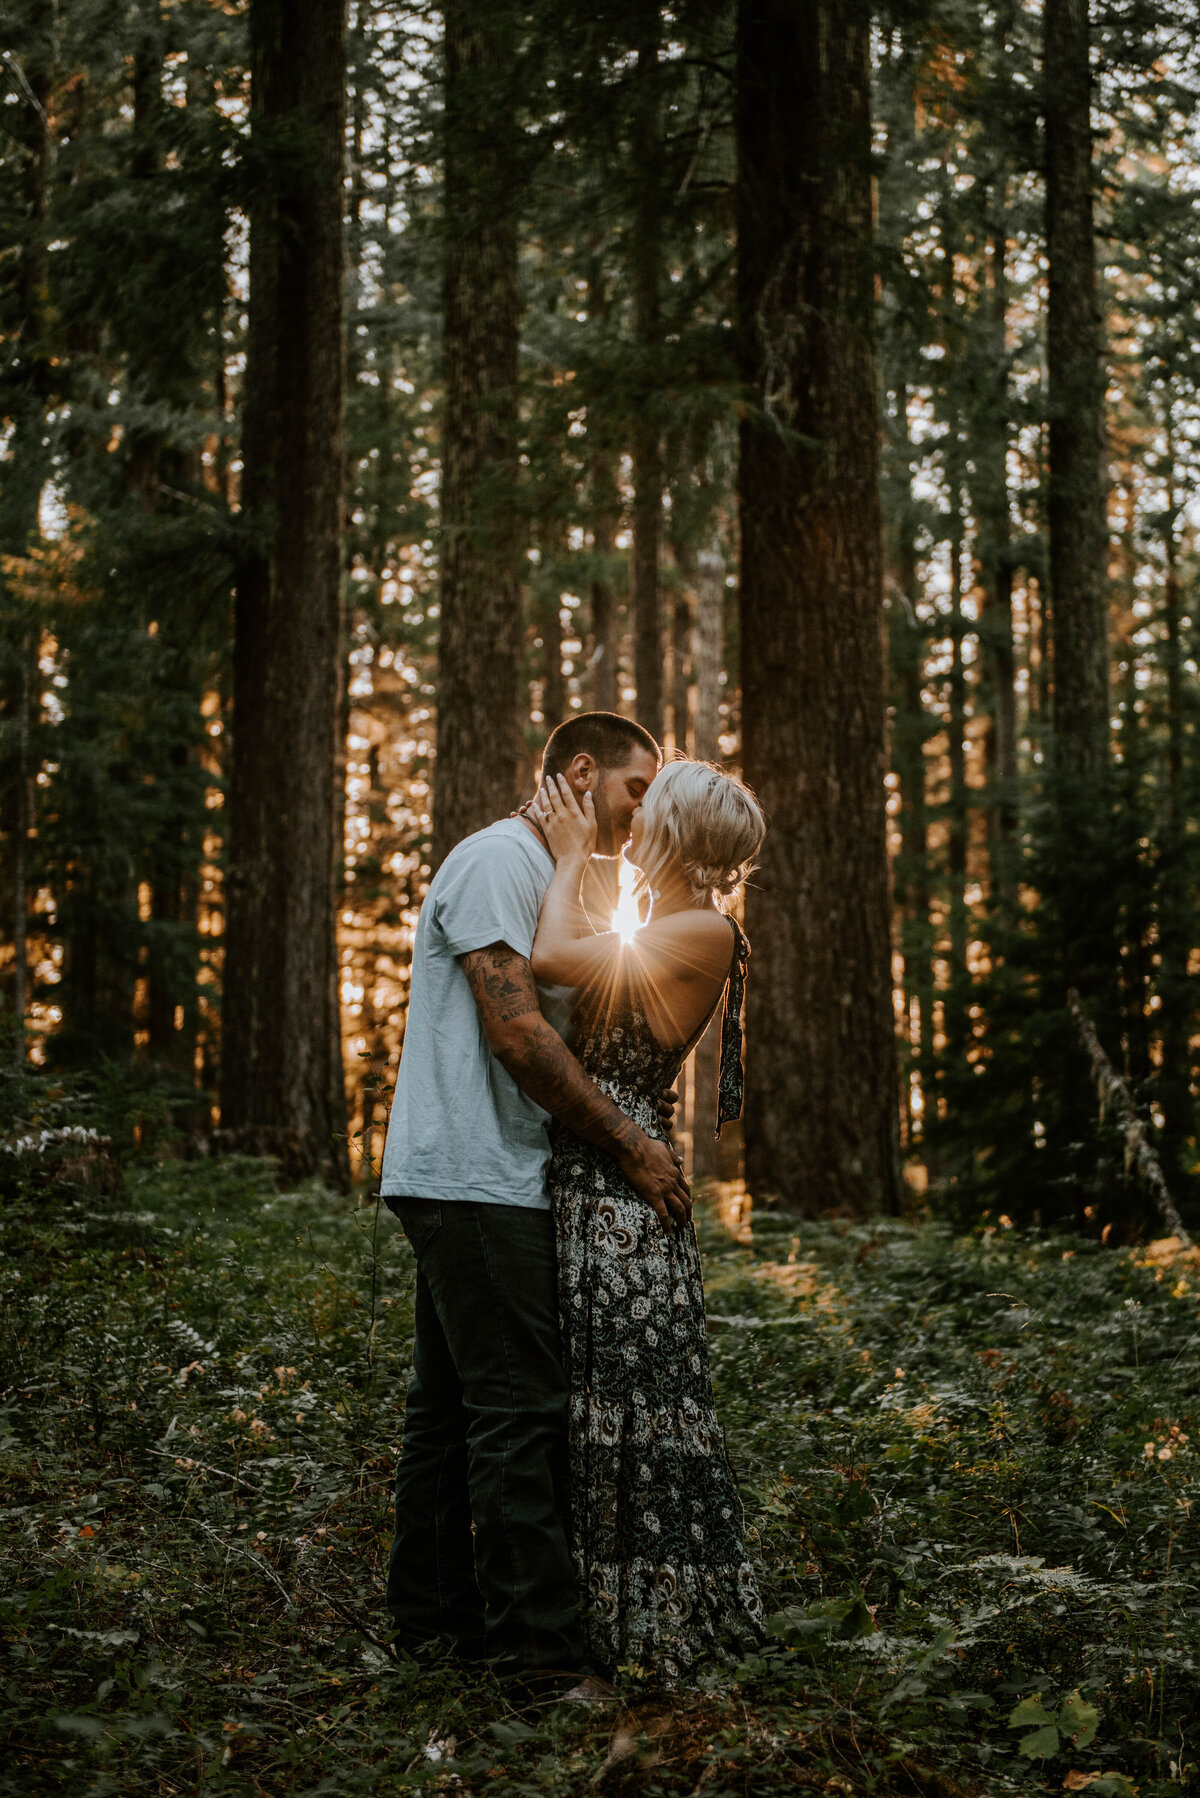 sahalie-falls-oregon-engagement-elopement-photographer-central-waterfall-bend-forest-old-growth-6912